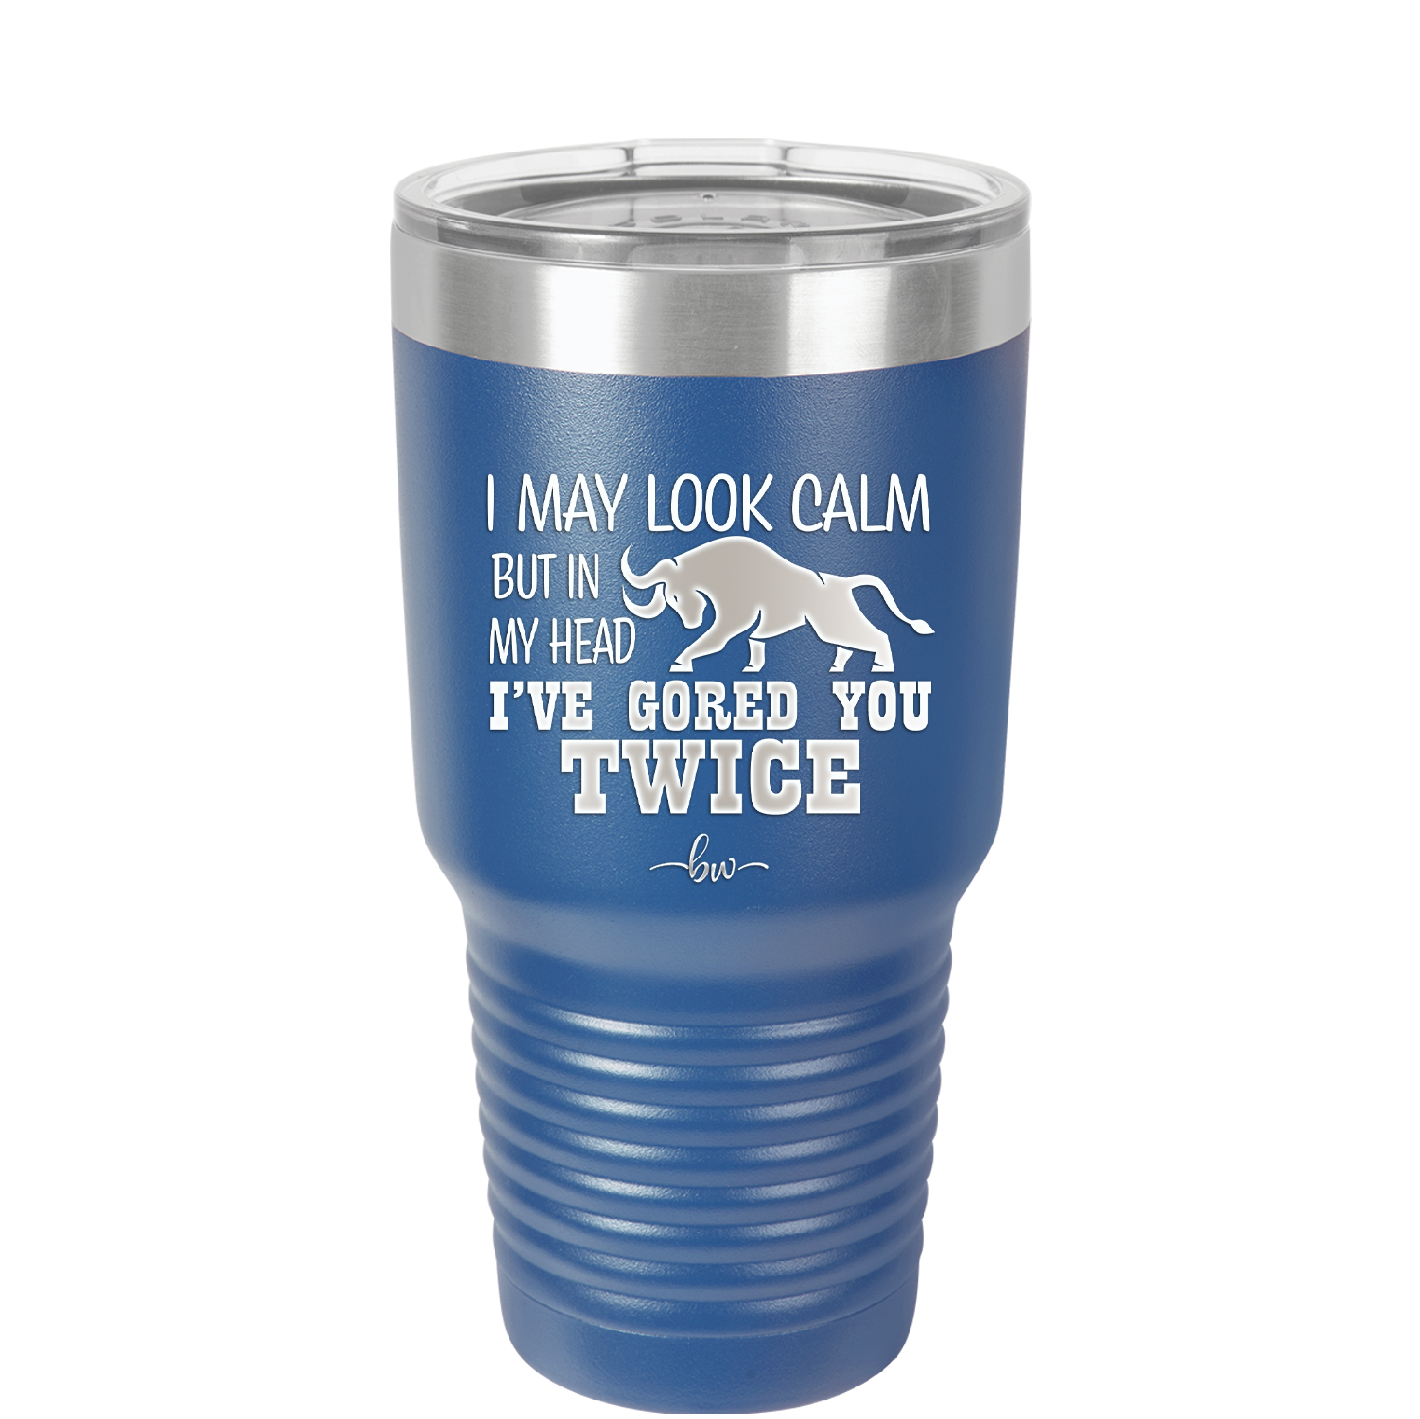 I May Look Calm But in My Head I've Gored You Twice - Laser Engraved Stainless Steel Drinkware - 2406 -